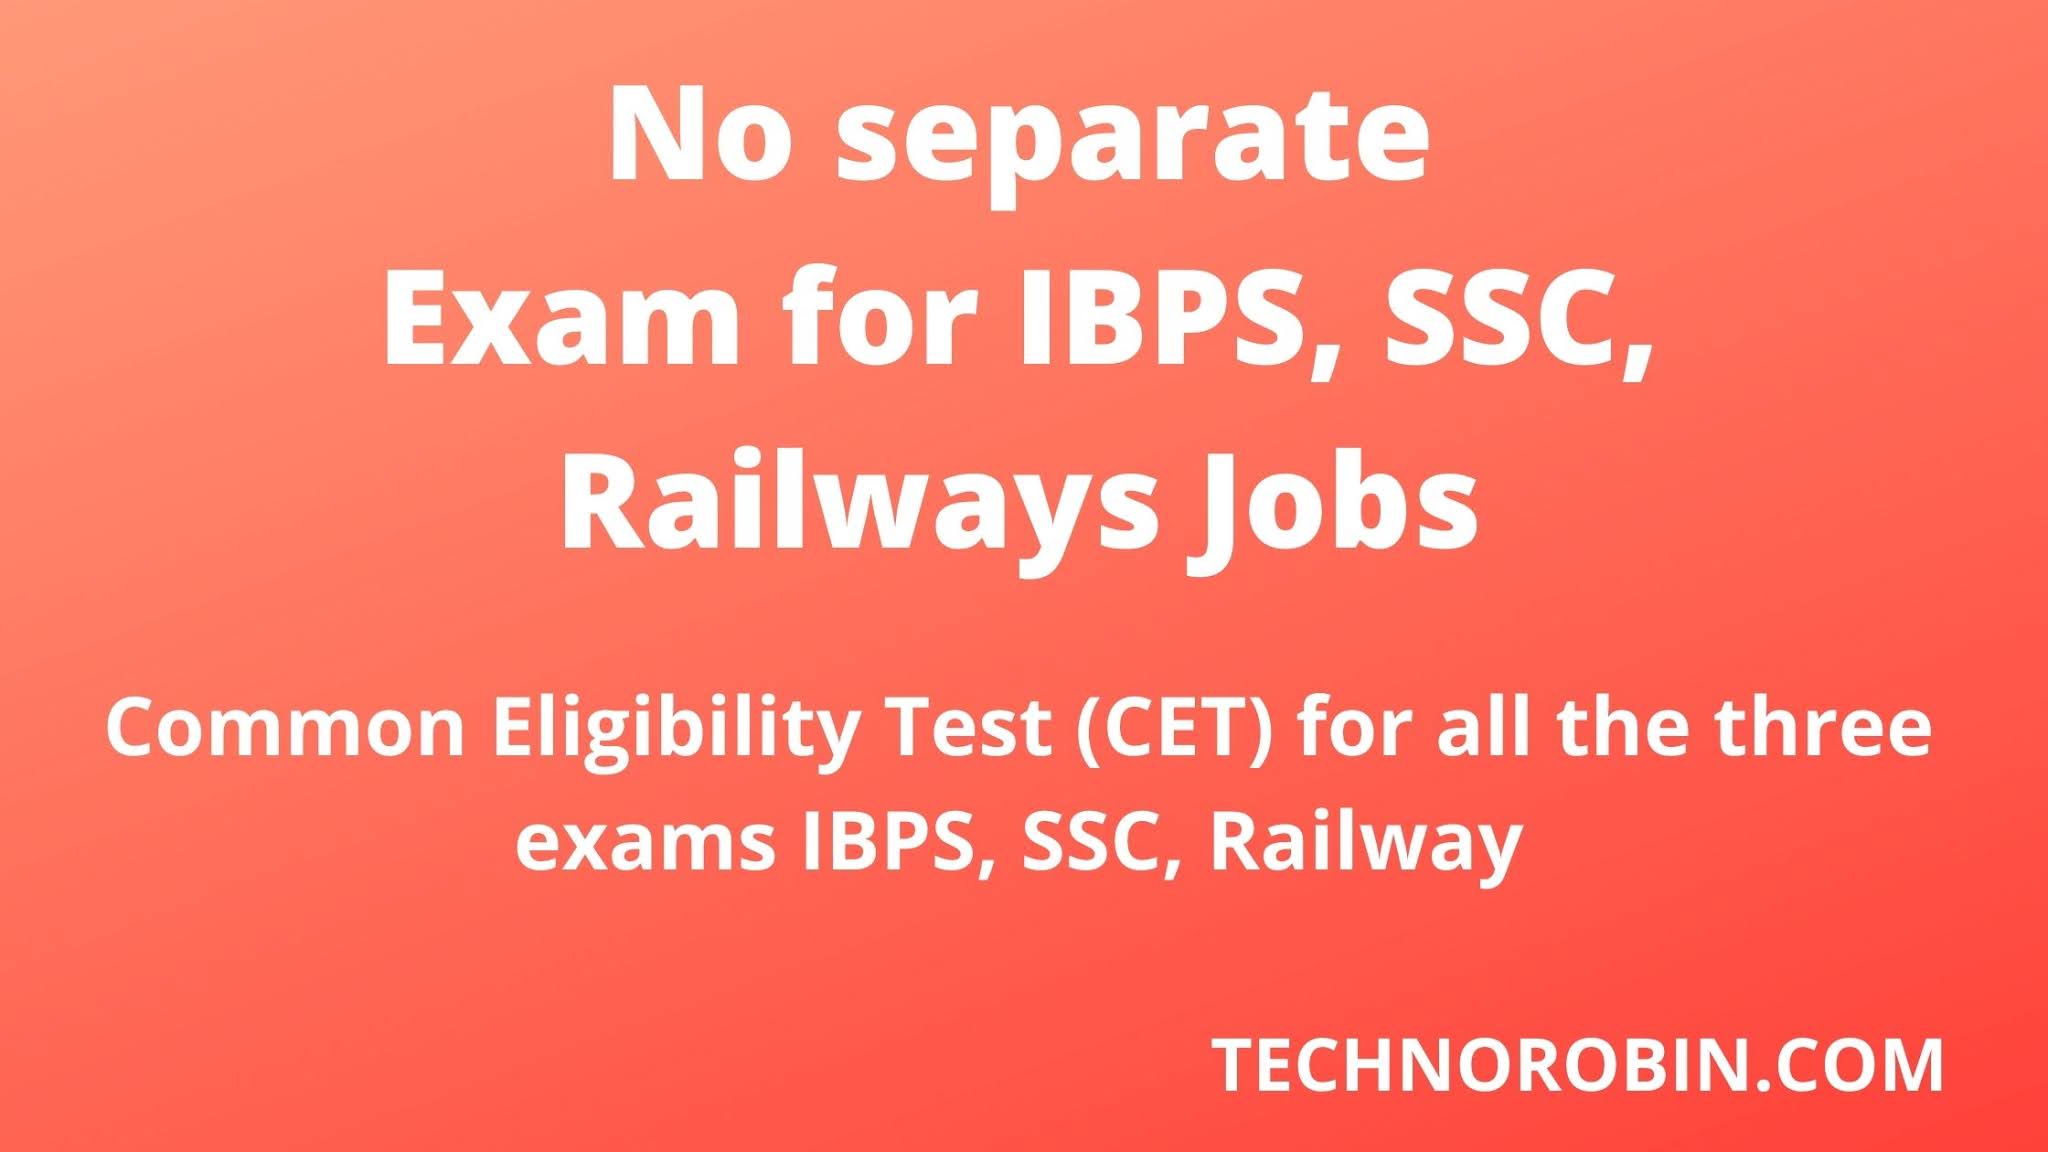 No separate Exam for IBPS, SSC, Railways Jobs